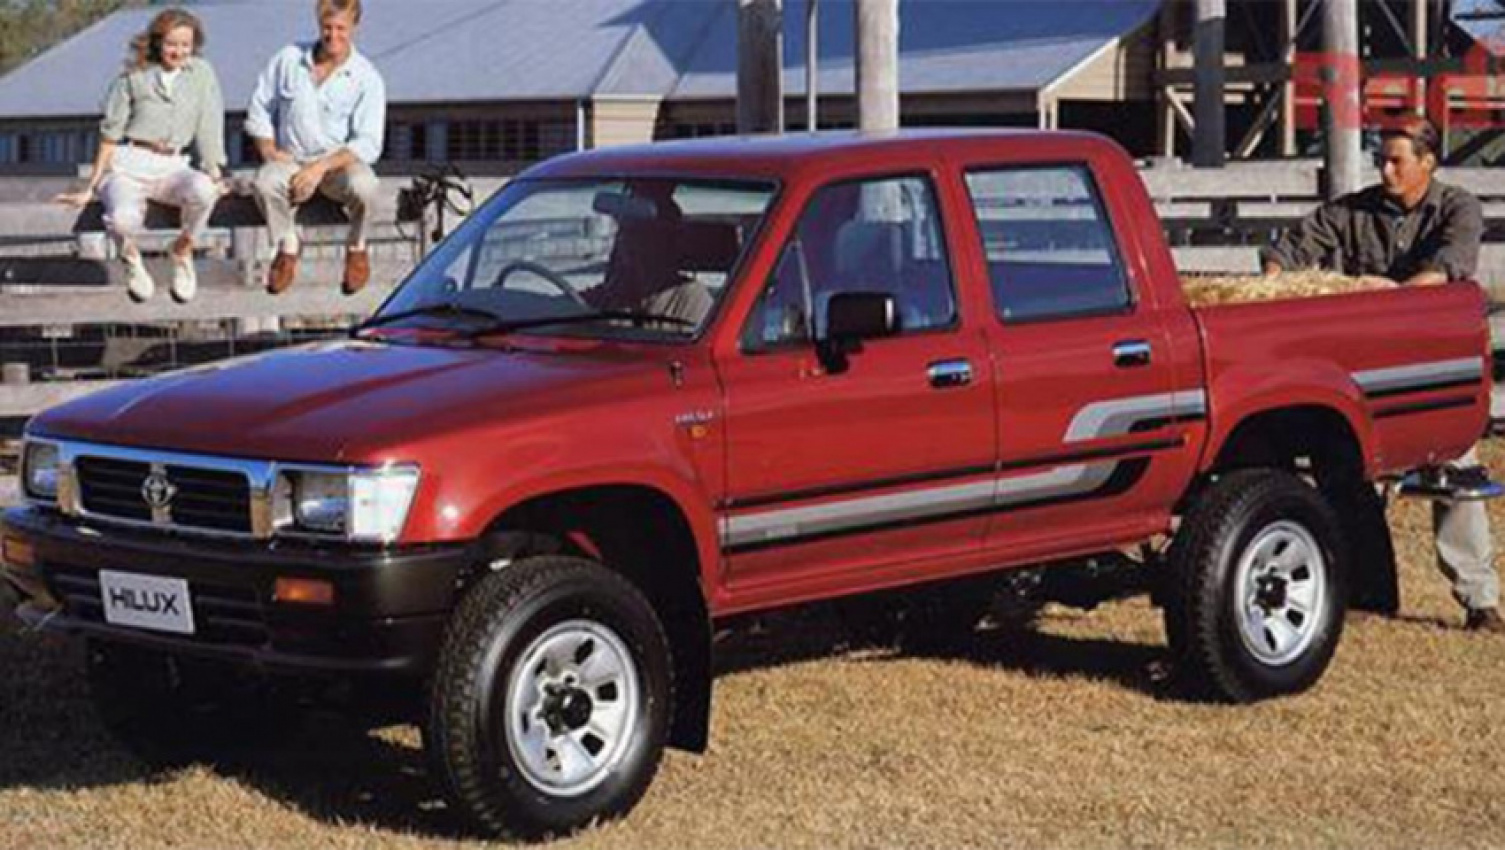 autos, cars, reviews, toyota, commercial, toyota commercial range, toyota hilux, toyota hilux 1988, toyota hilux 1989, toyota hilux 1990, toyota hilux 1991, toyota hilux 1992, toyota hilux 1993, toyota hilux 1994, toyota hilux 1995, toyota hilux 1996, toyota hilux 1997, toyota hilux reviews, toyota reviews, toyota ute range, used car reviews, vnex, android, used toyota hilux review: 1988-1997